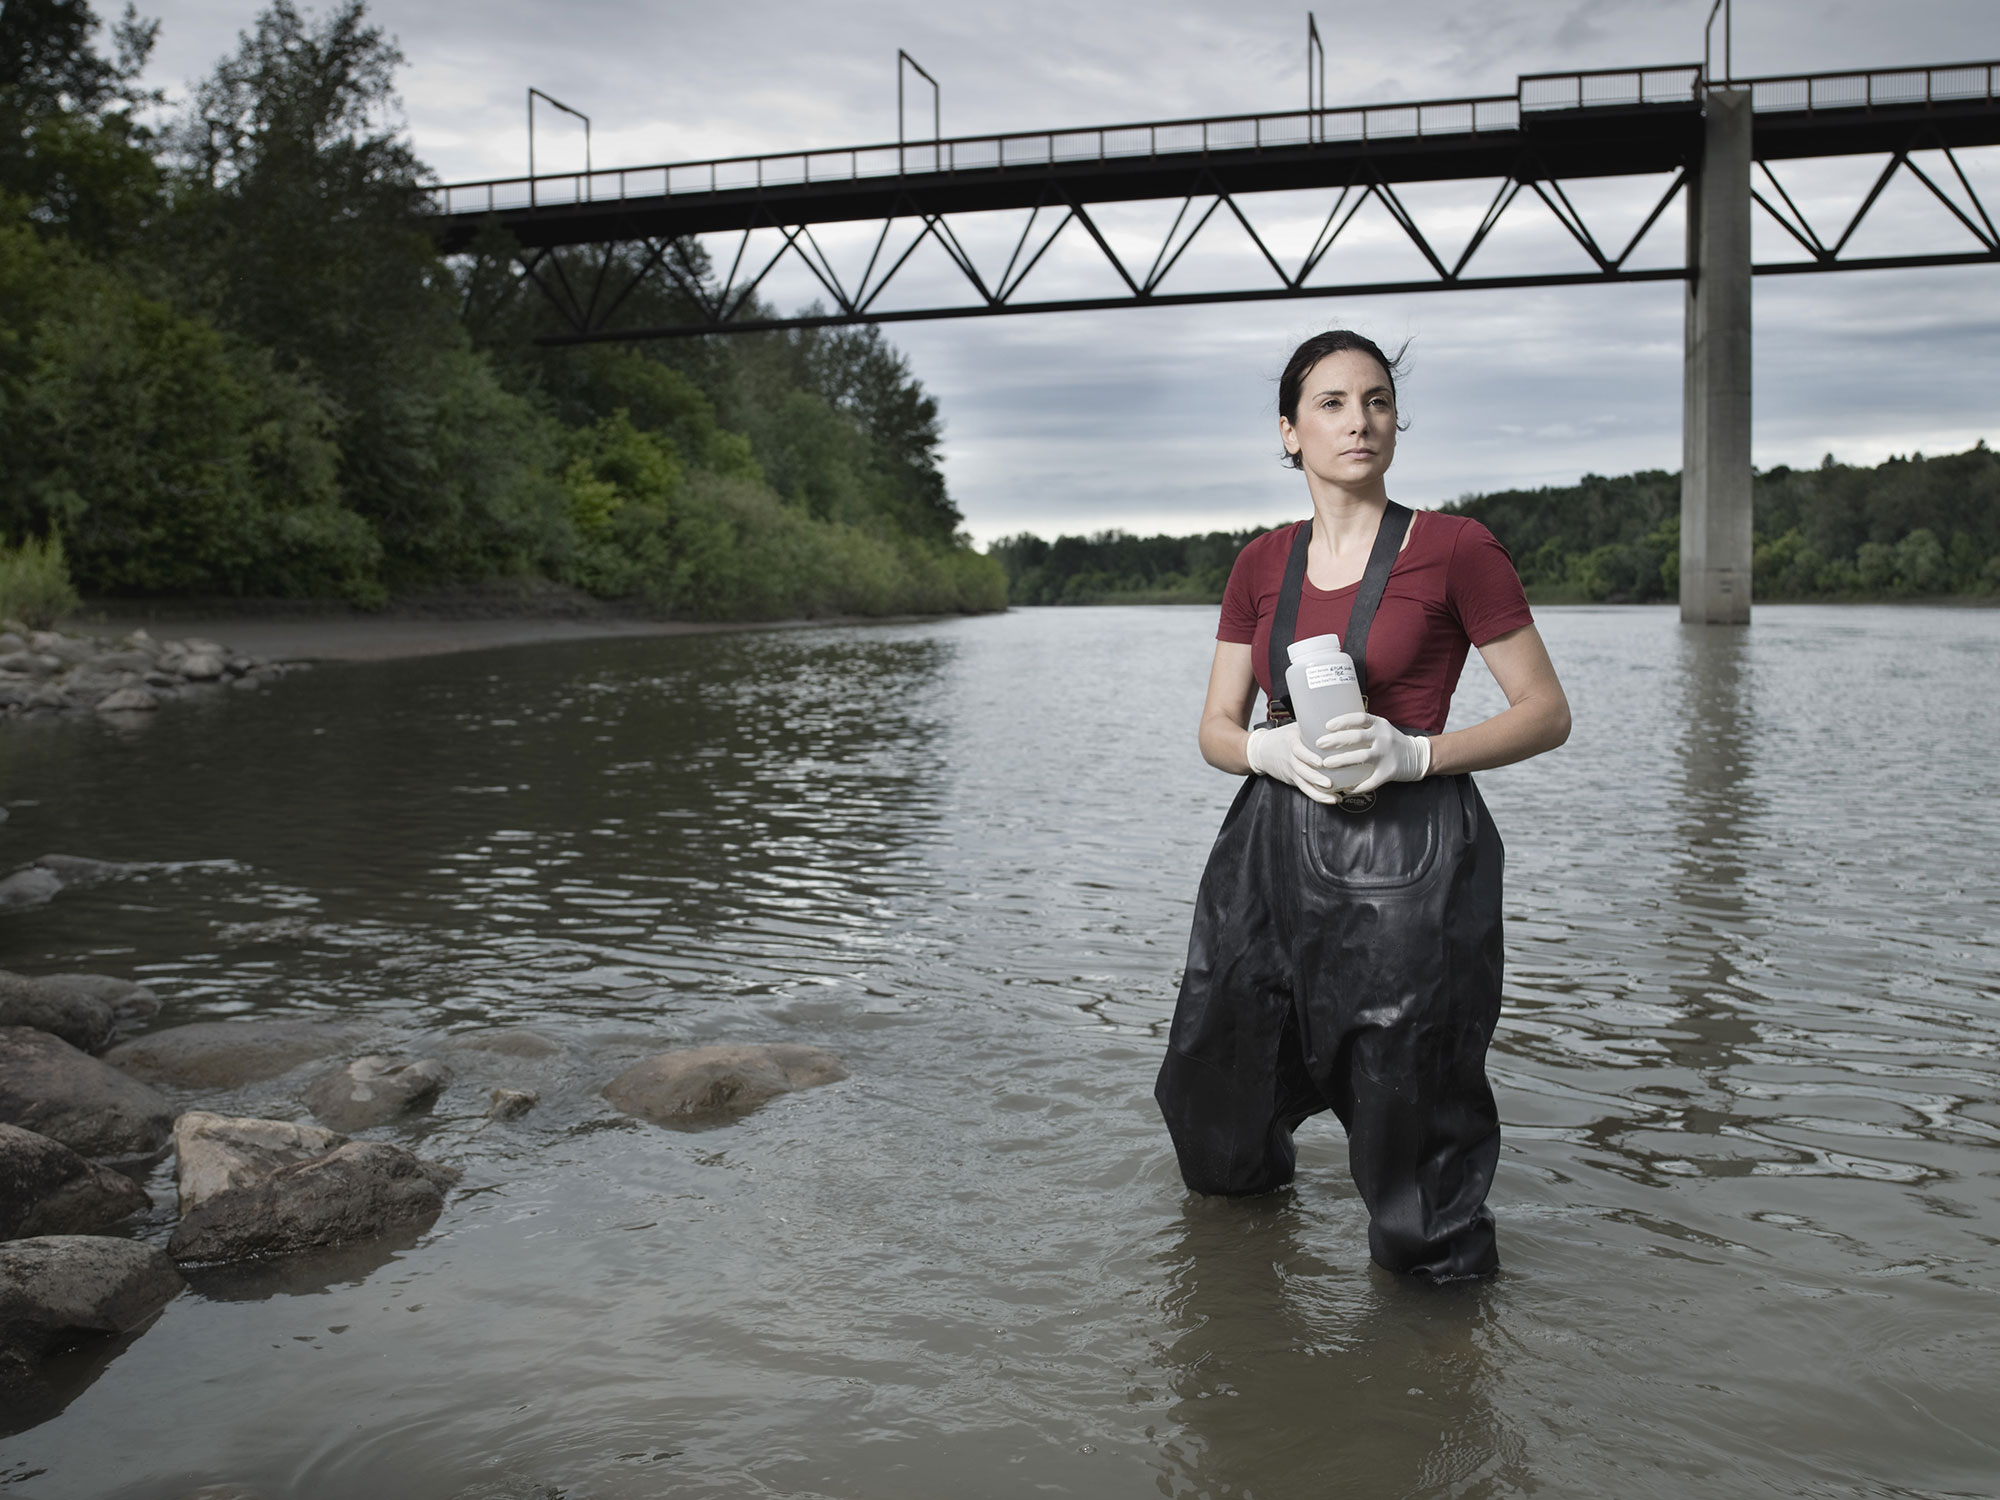 steph neufeld stands knee-deep in gaiters and holds container in river